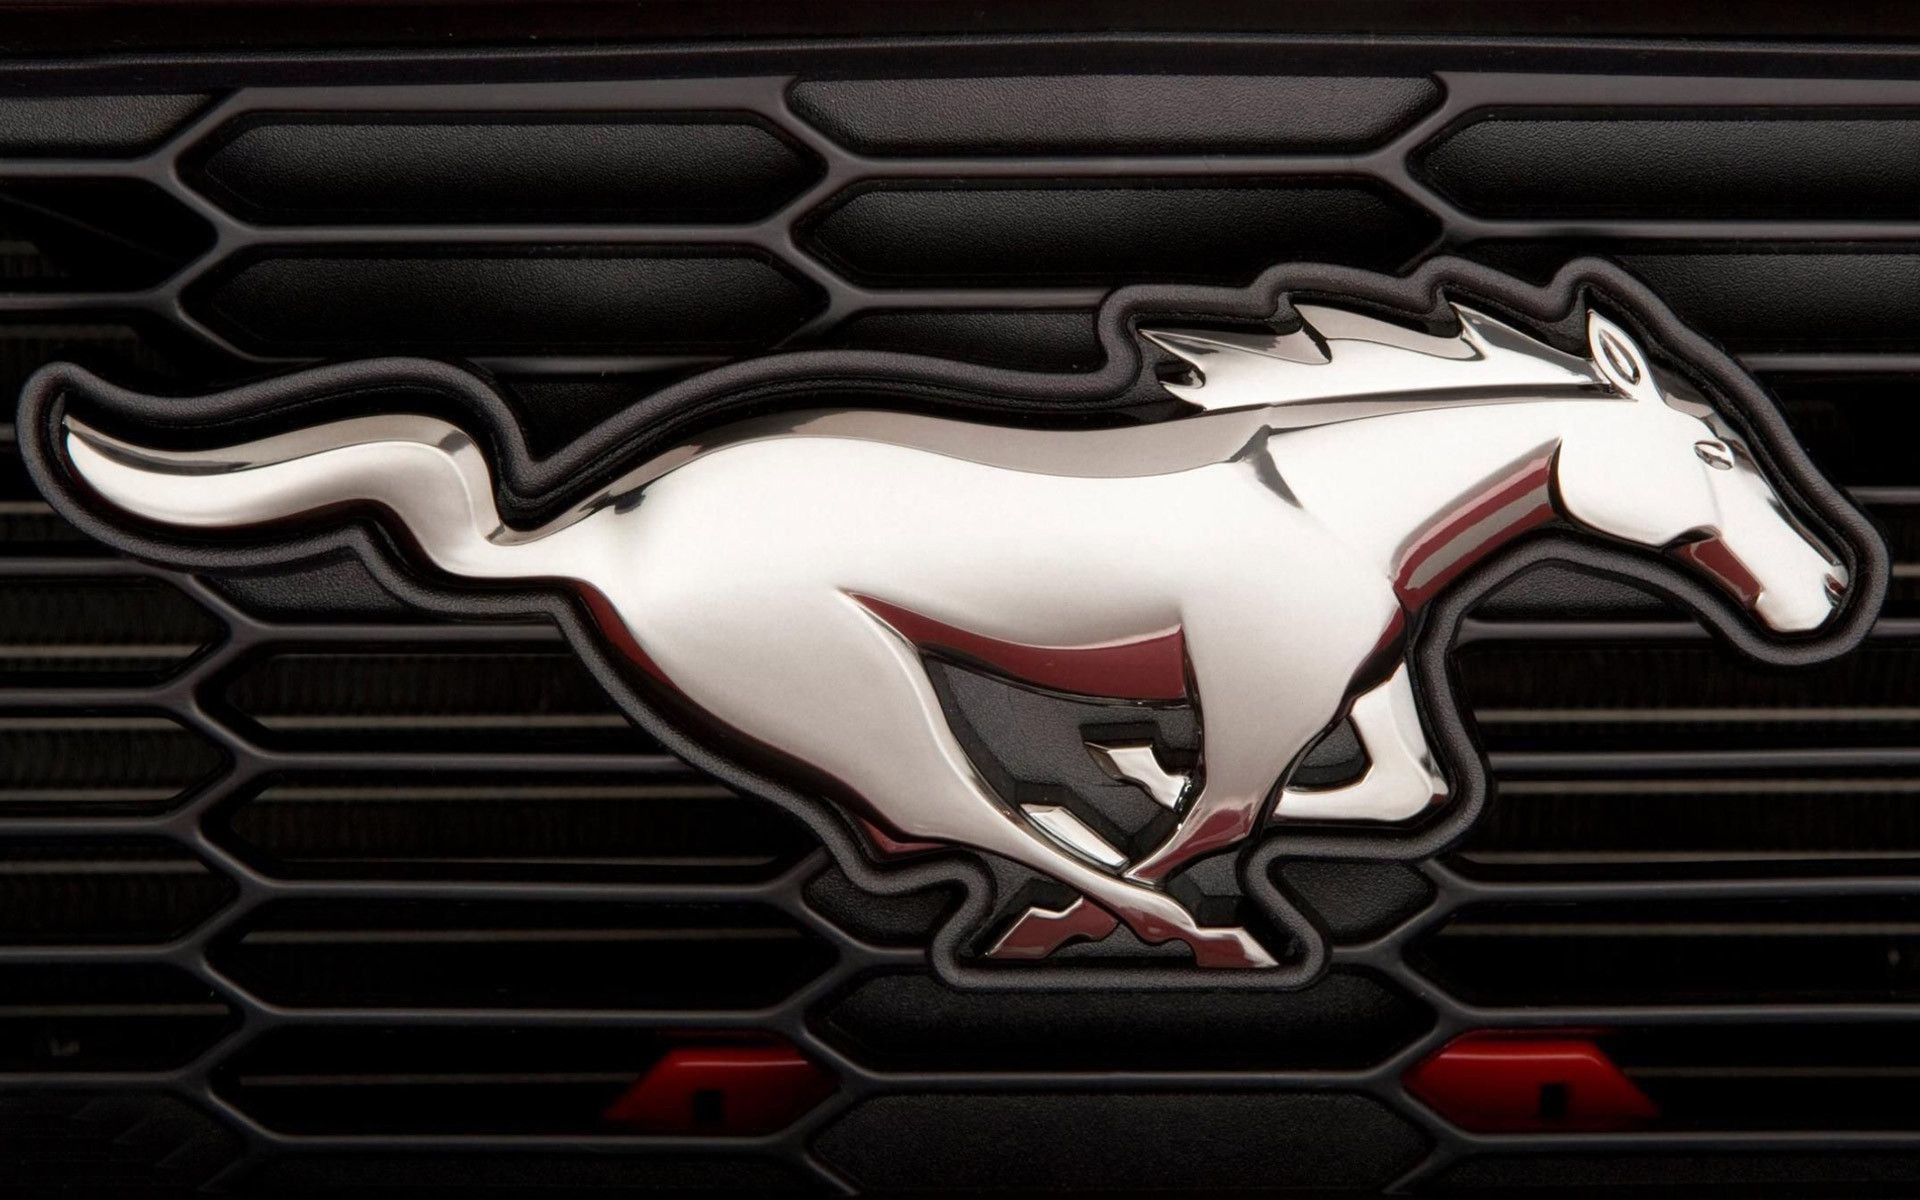 1920x1200 Wallpapers For > Ford Mustang Logo Wallpaper Hd